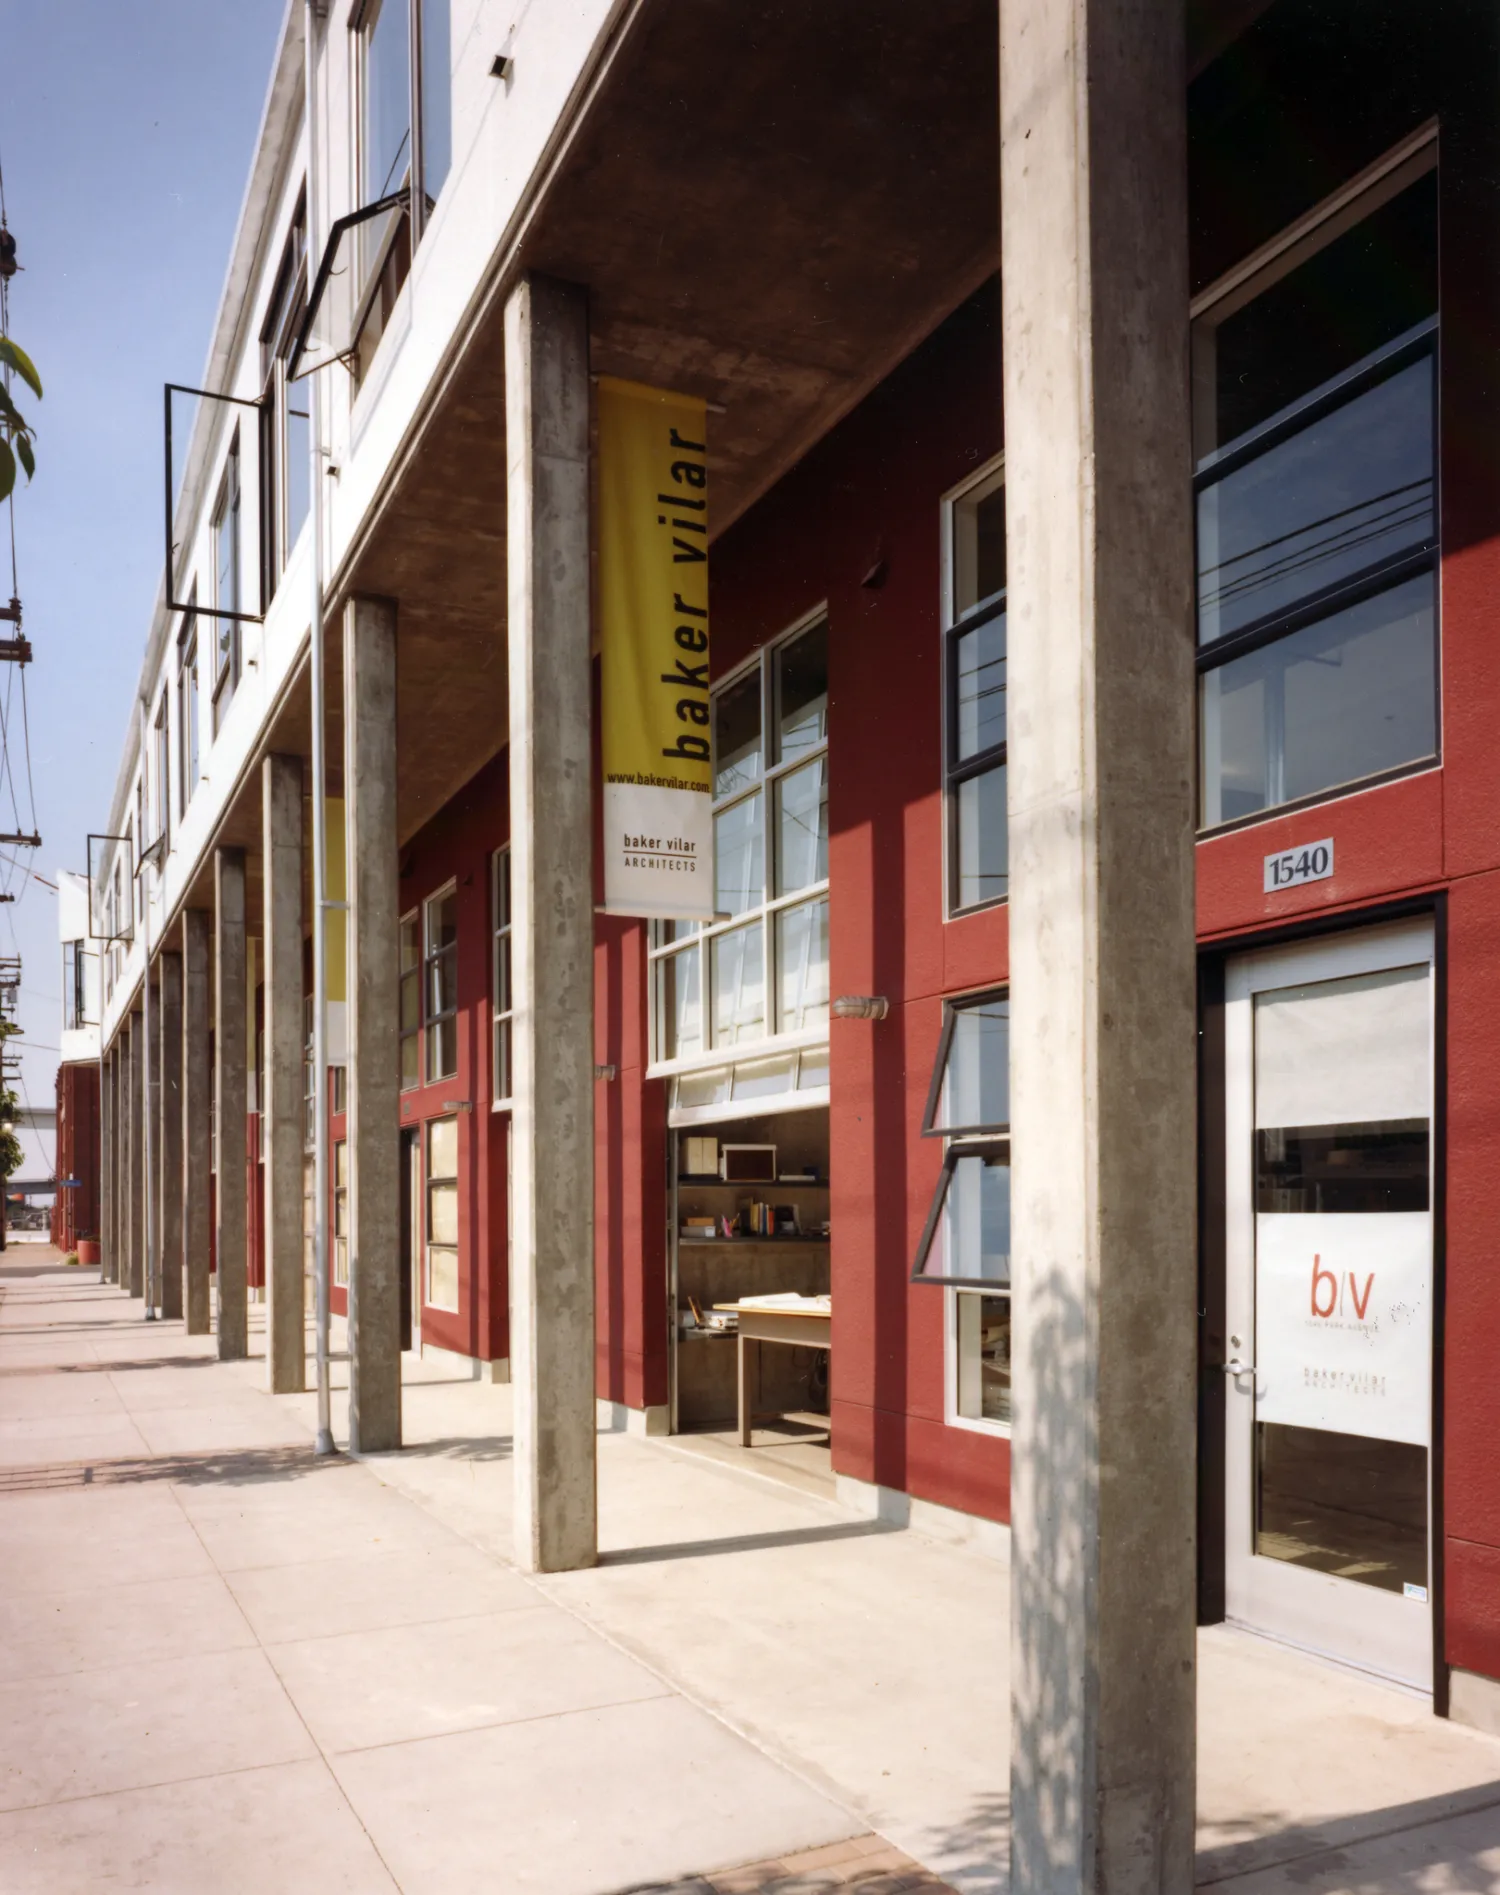 Exterior view of the ground level live/work lofts at 1500 Park Avenue Lofts in Emeryville, California.